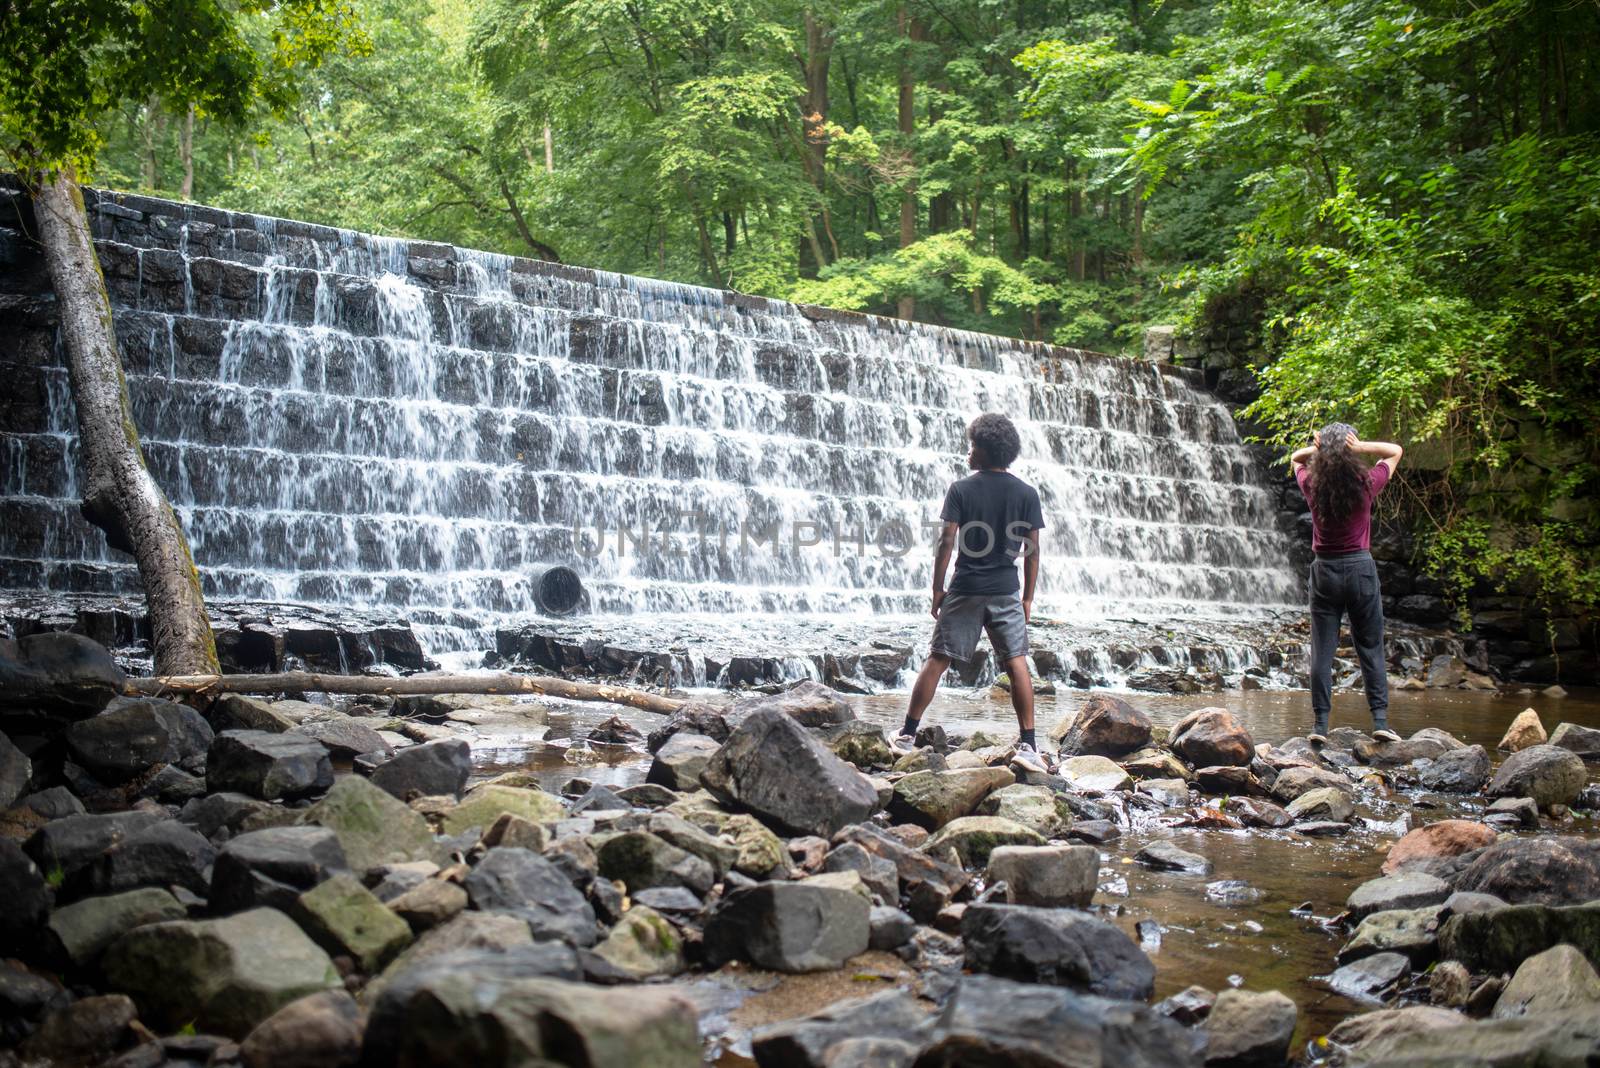 Water cascades over the tiered waterfall with lush woodland foliage behind. Two young men, African-American and Caucasion, stand on stones at base of falls.